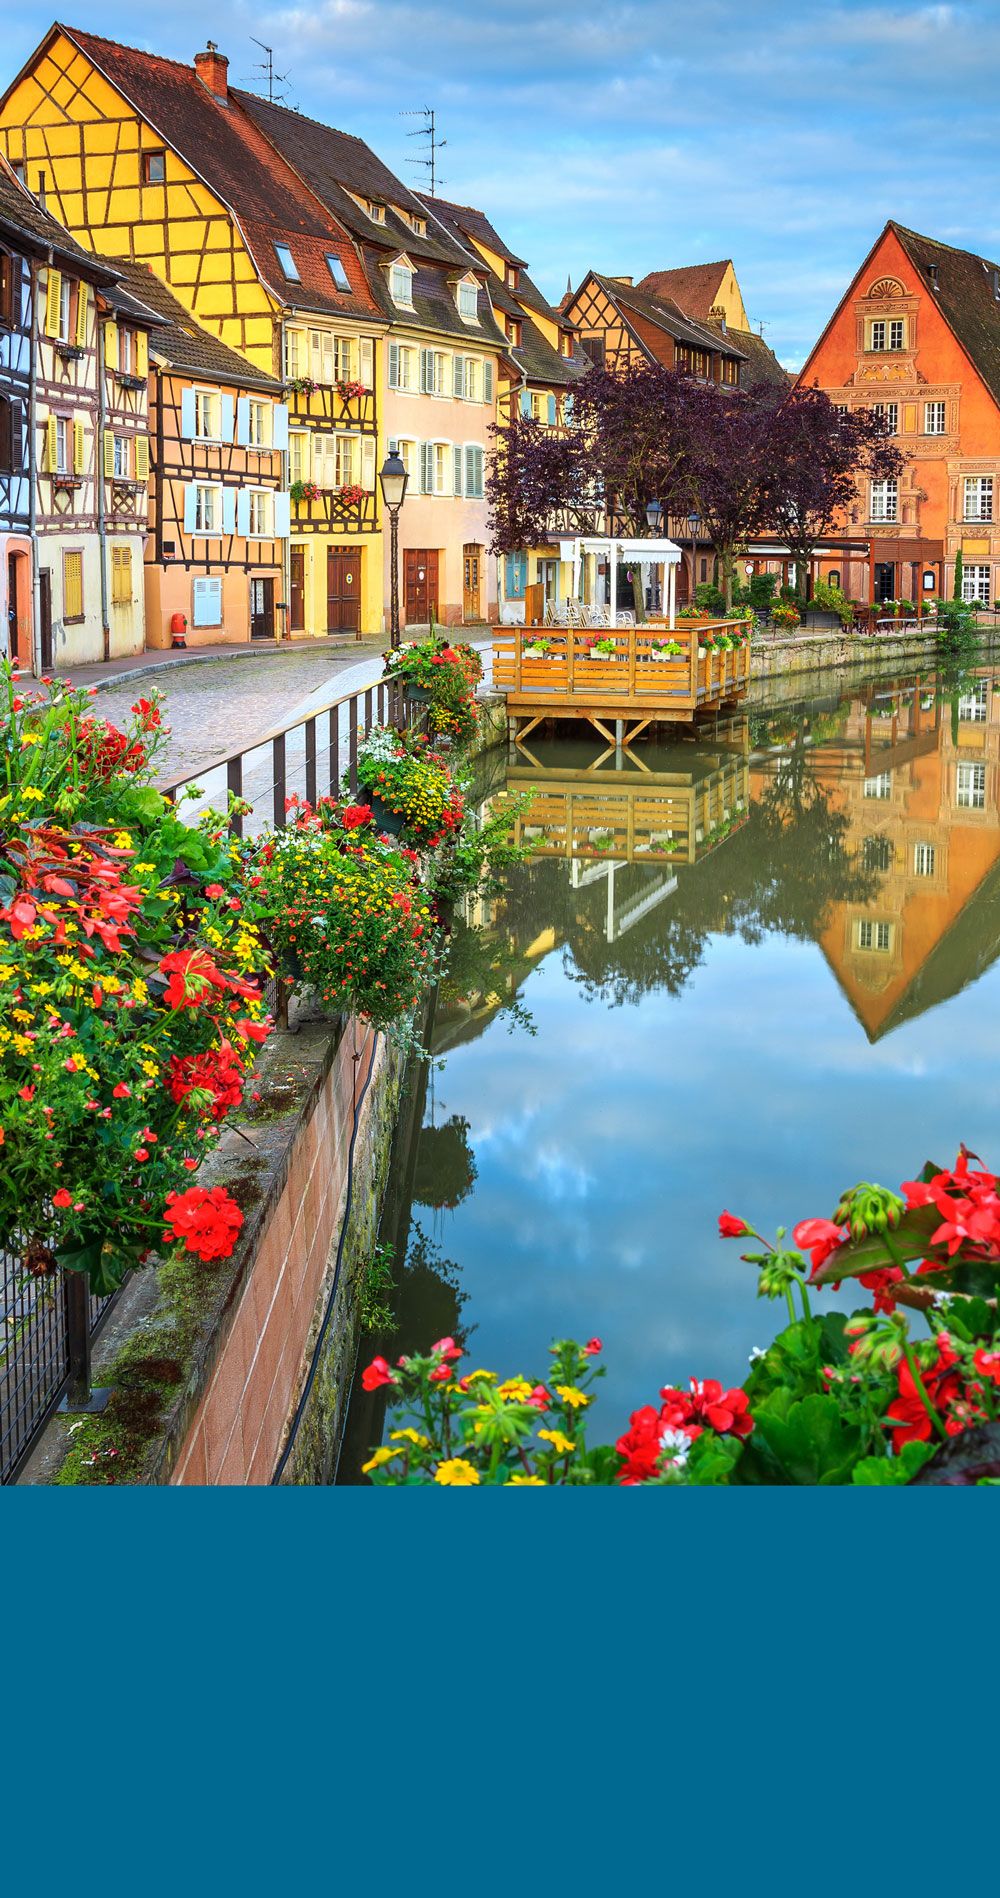 tours in colmar france